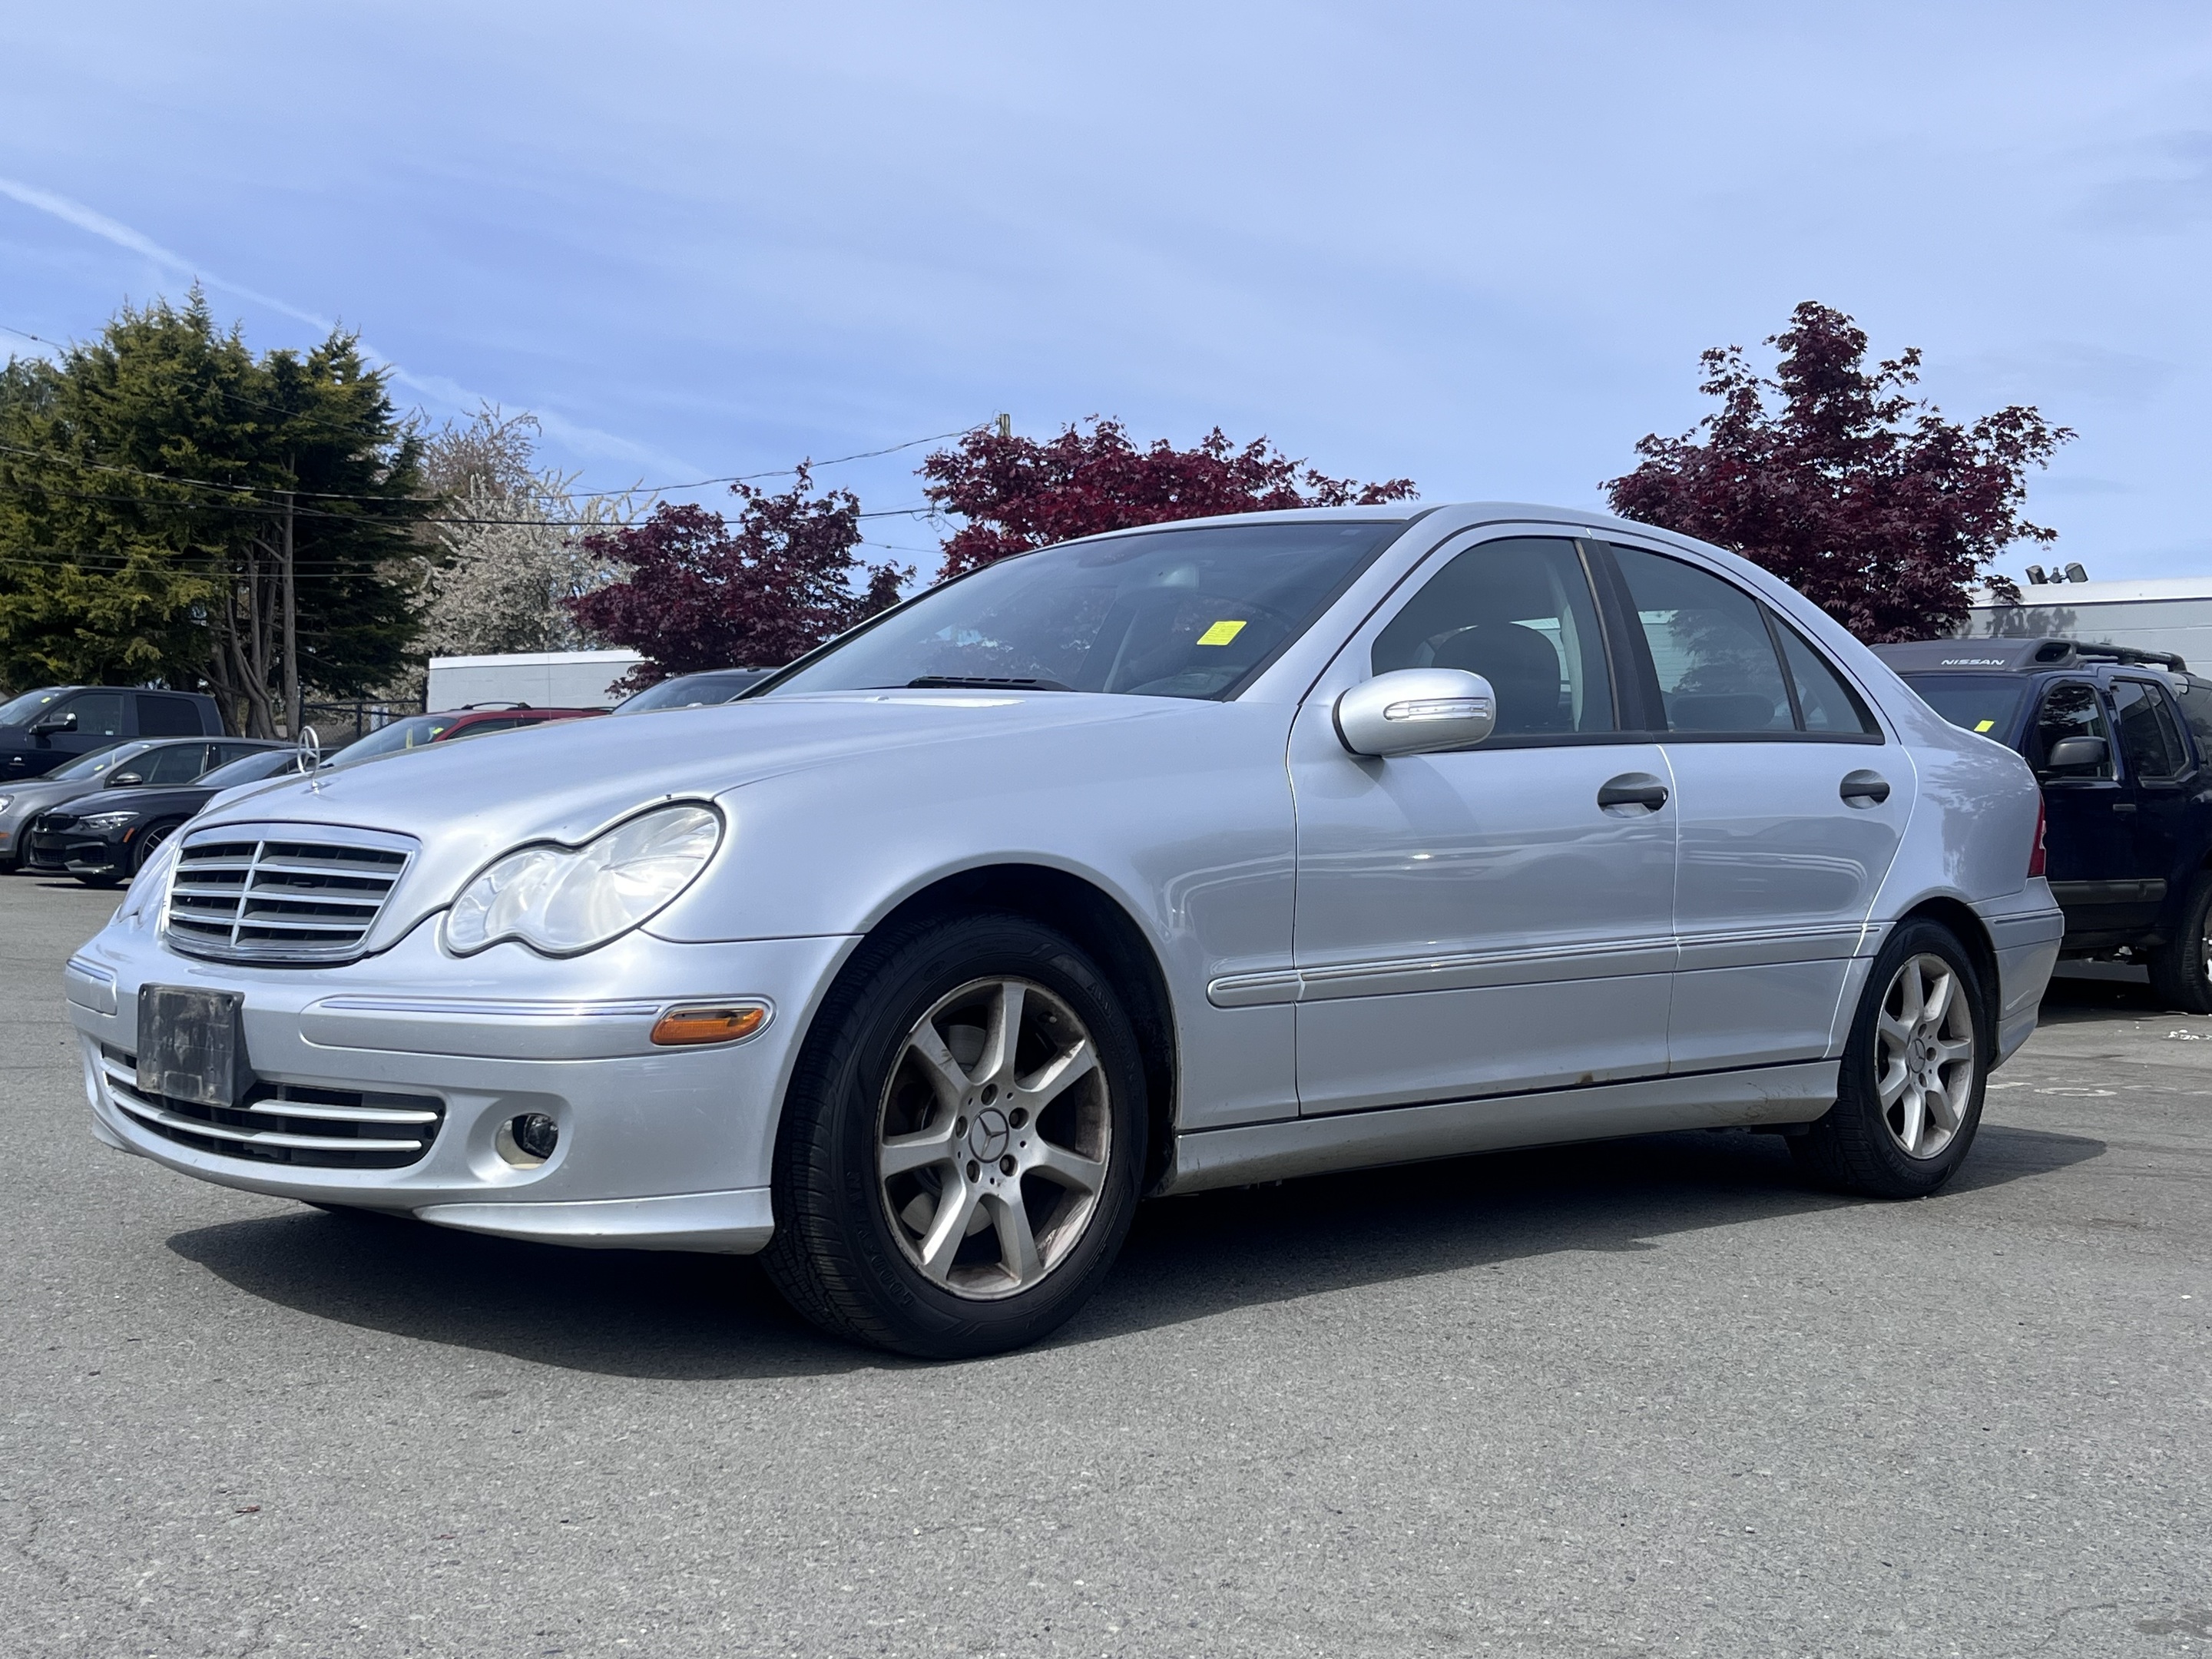 2006 Mercedes-Benz C-Class *AS IS* Leather Interior, Sunroof, A/C. 